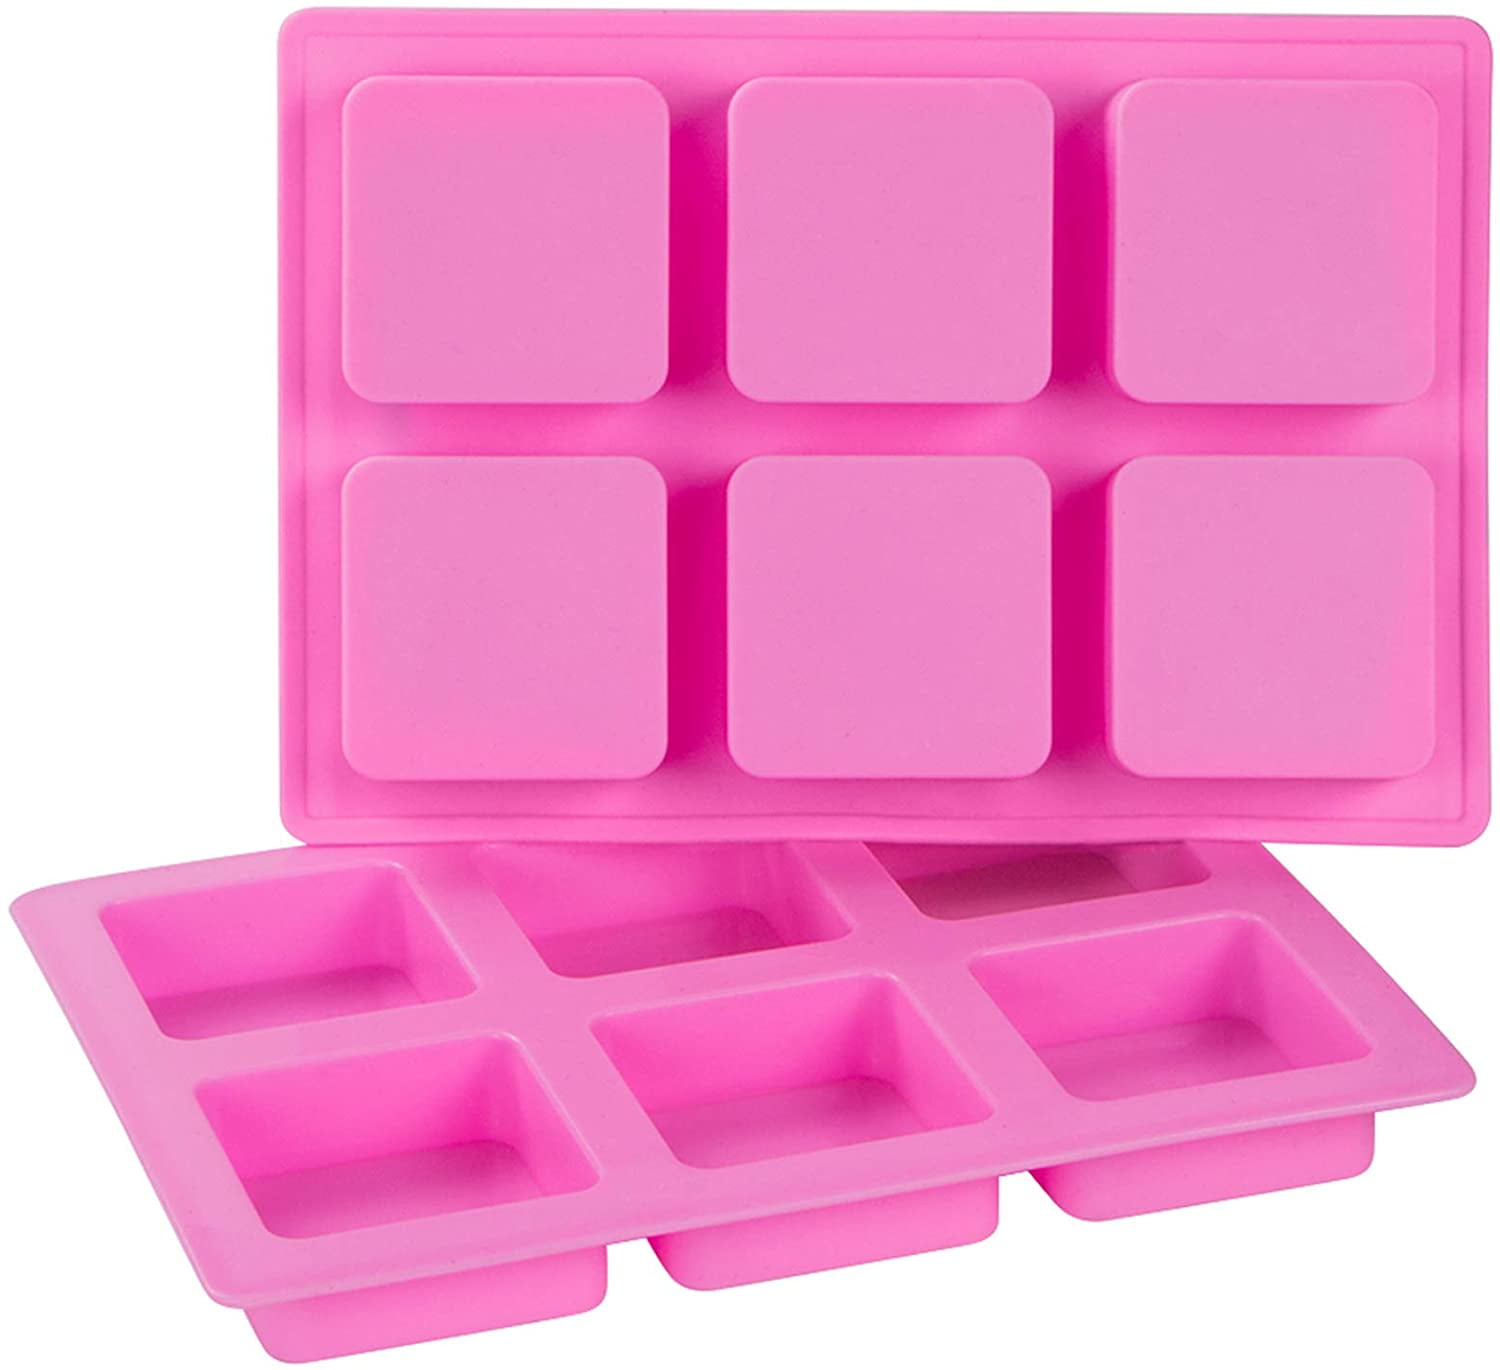 Mini Muffin Cup Silicone Soap Cookies Cupcake Bakeware Pan Tray Kitchen Tool MS 